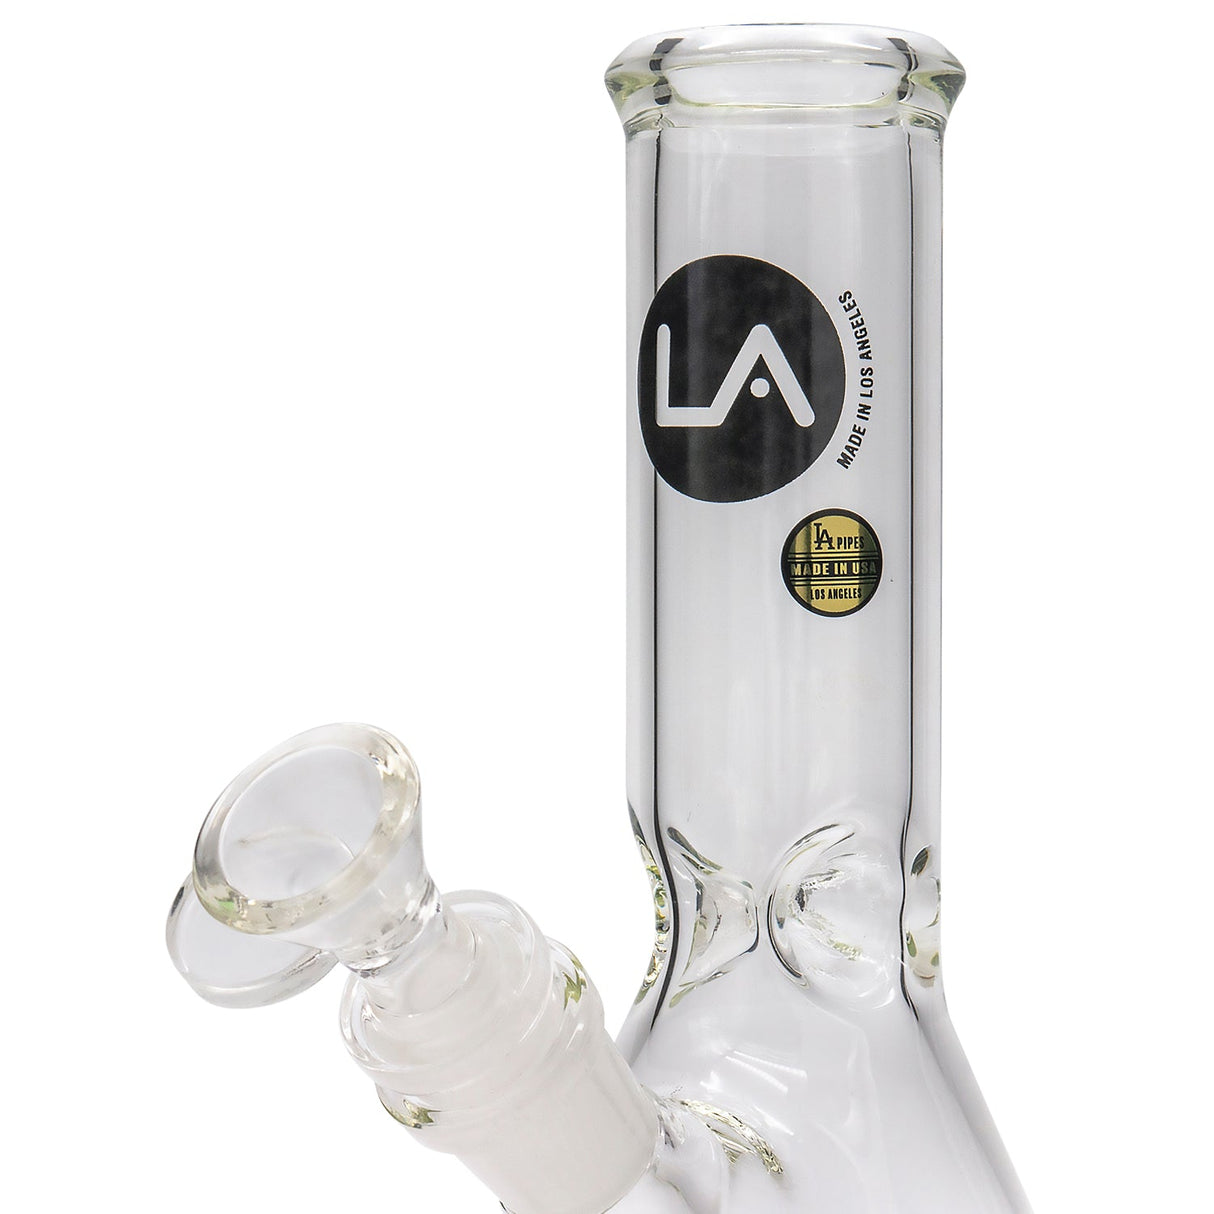 LA Pipes Basic Beaker Water Pipe, clear borosilicate glass, side view on white background